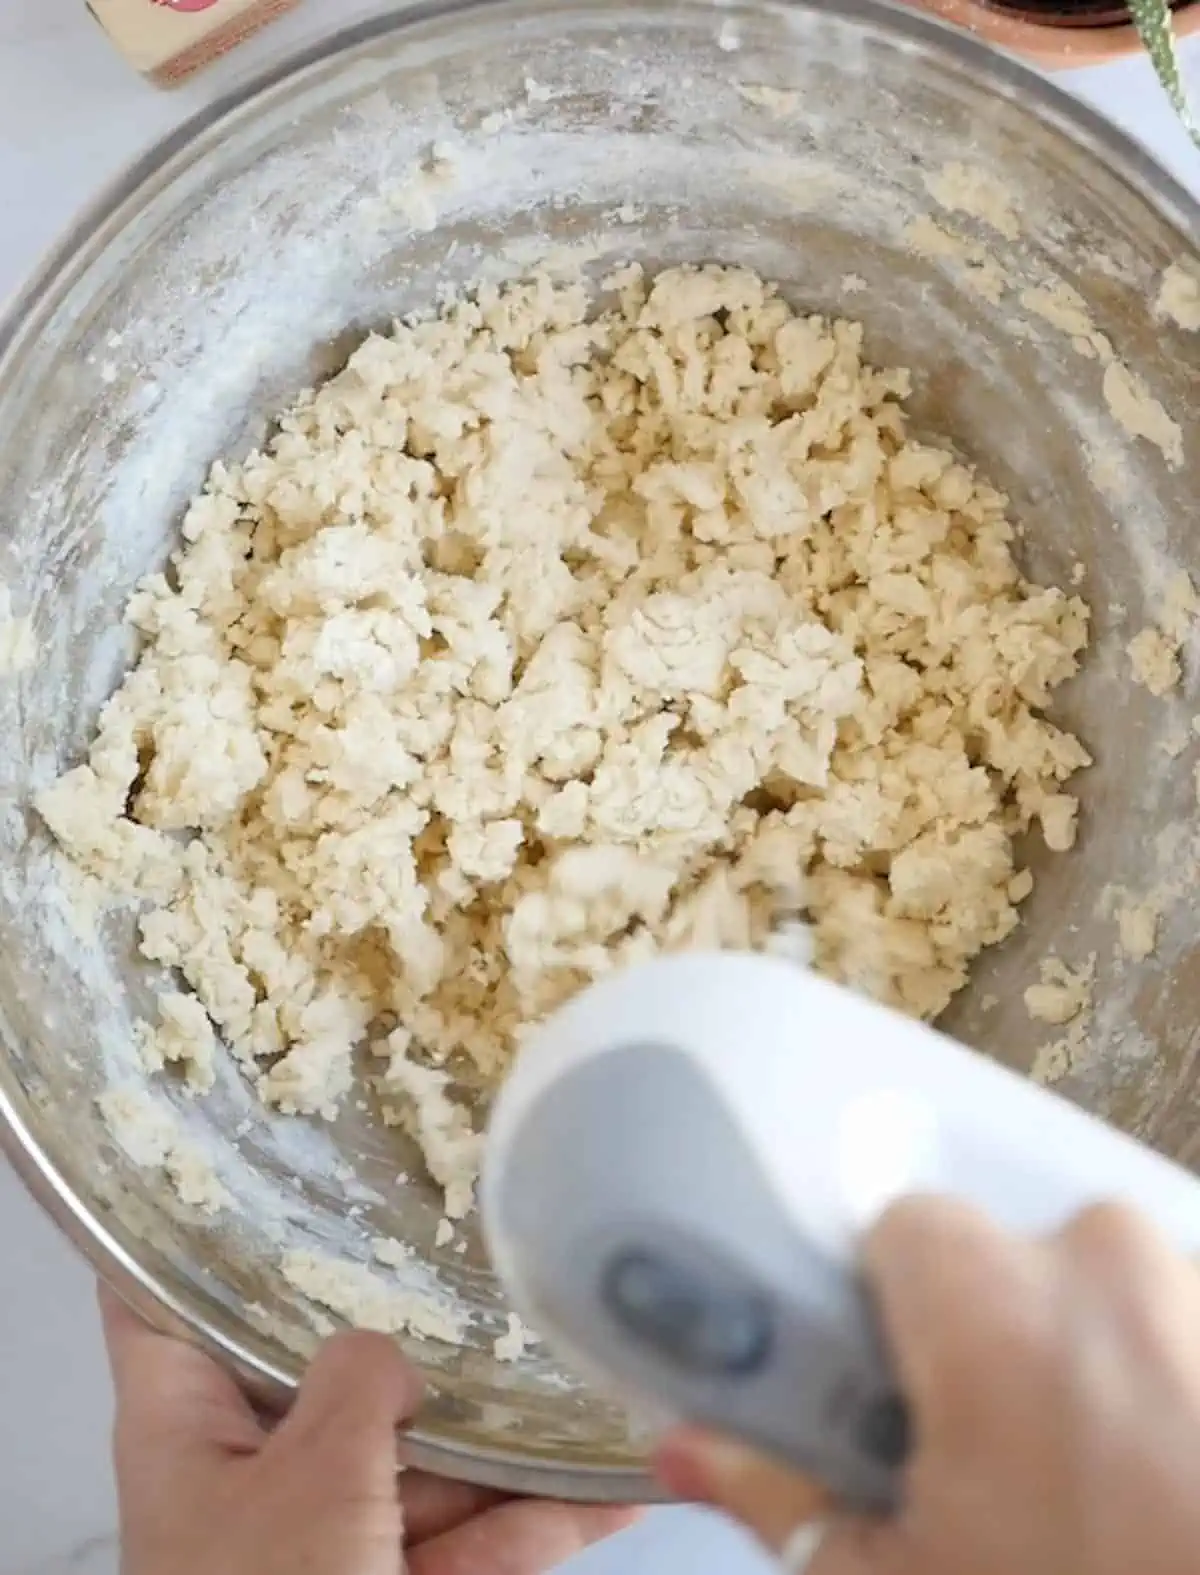 Crumbly vegan sugar cookie batter that is being mixed with an electric hand mixer.